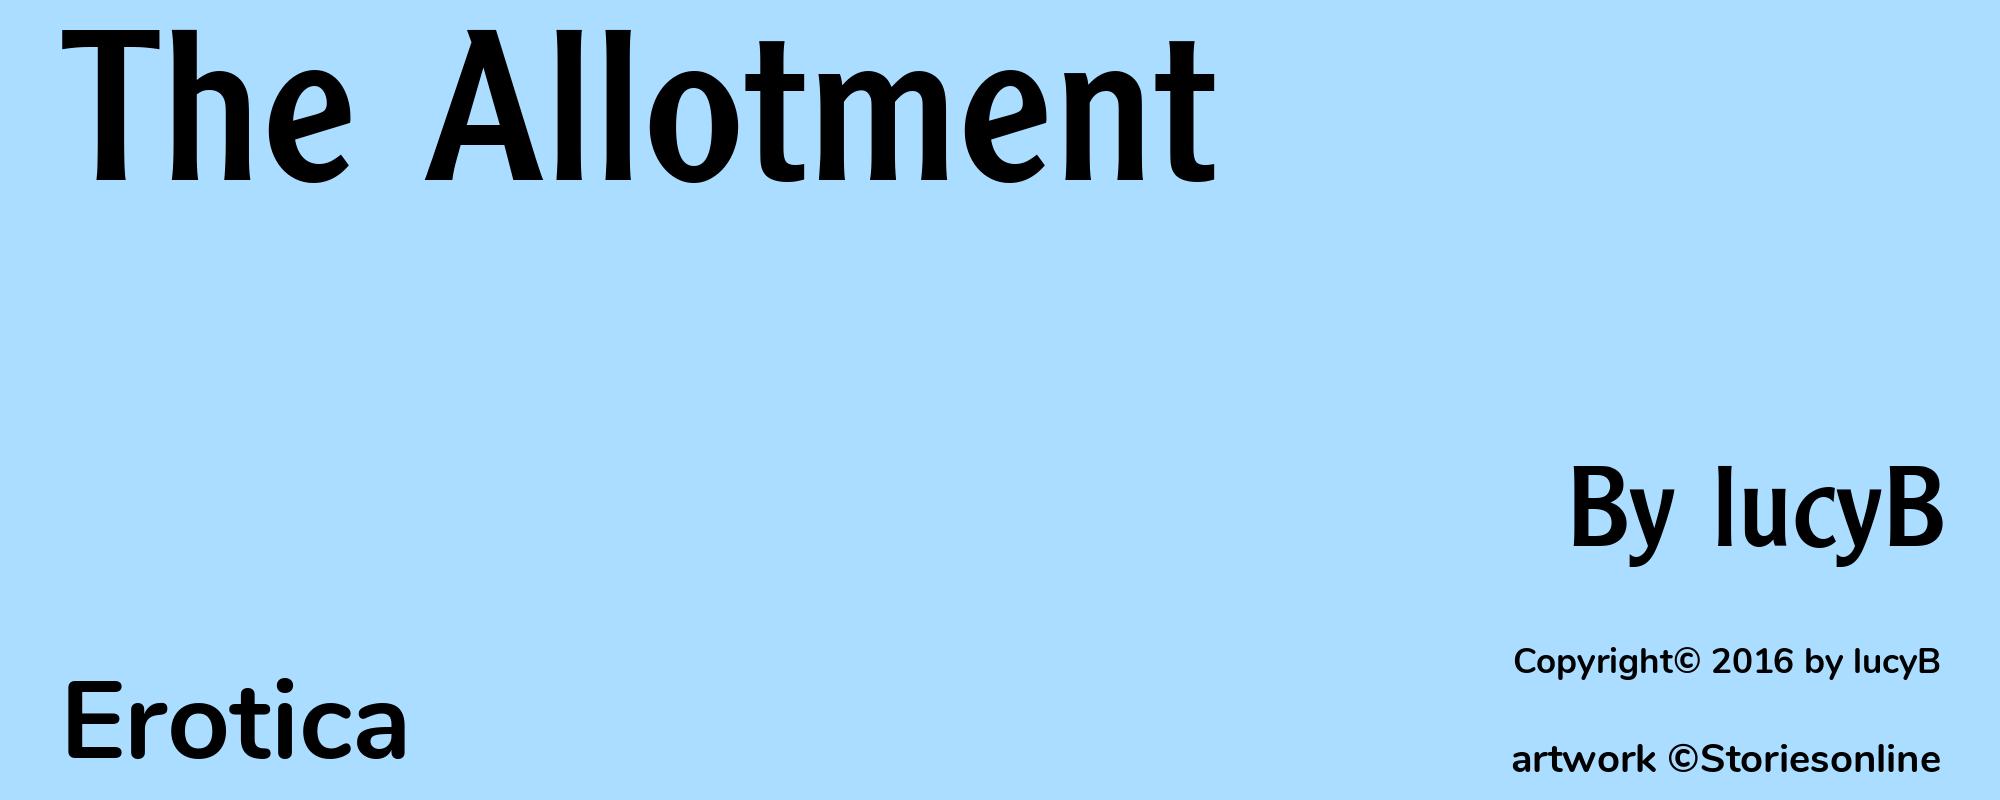 The Allotment - Cover